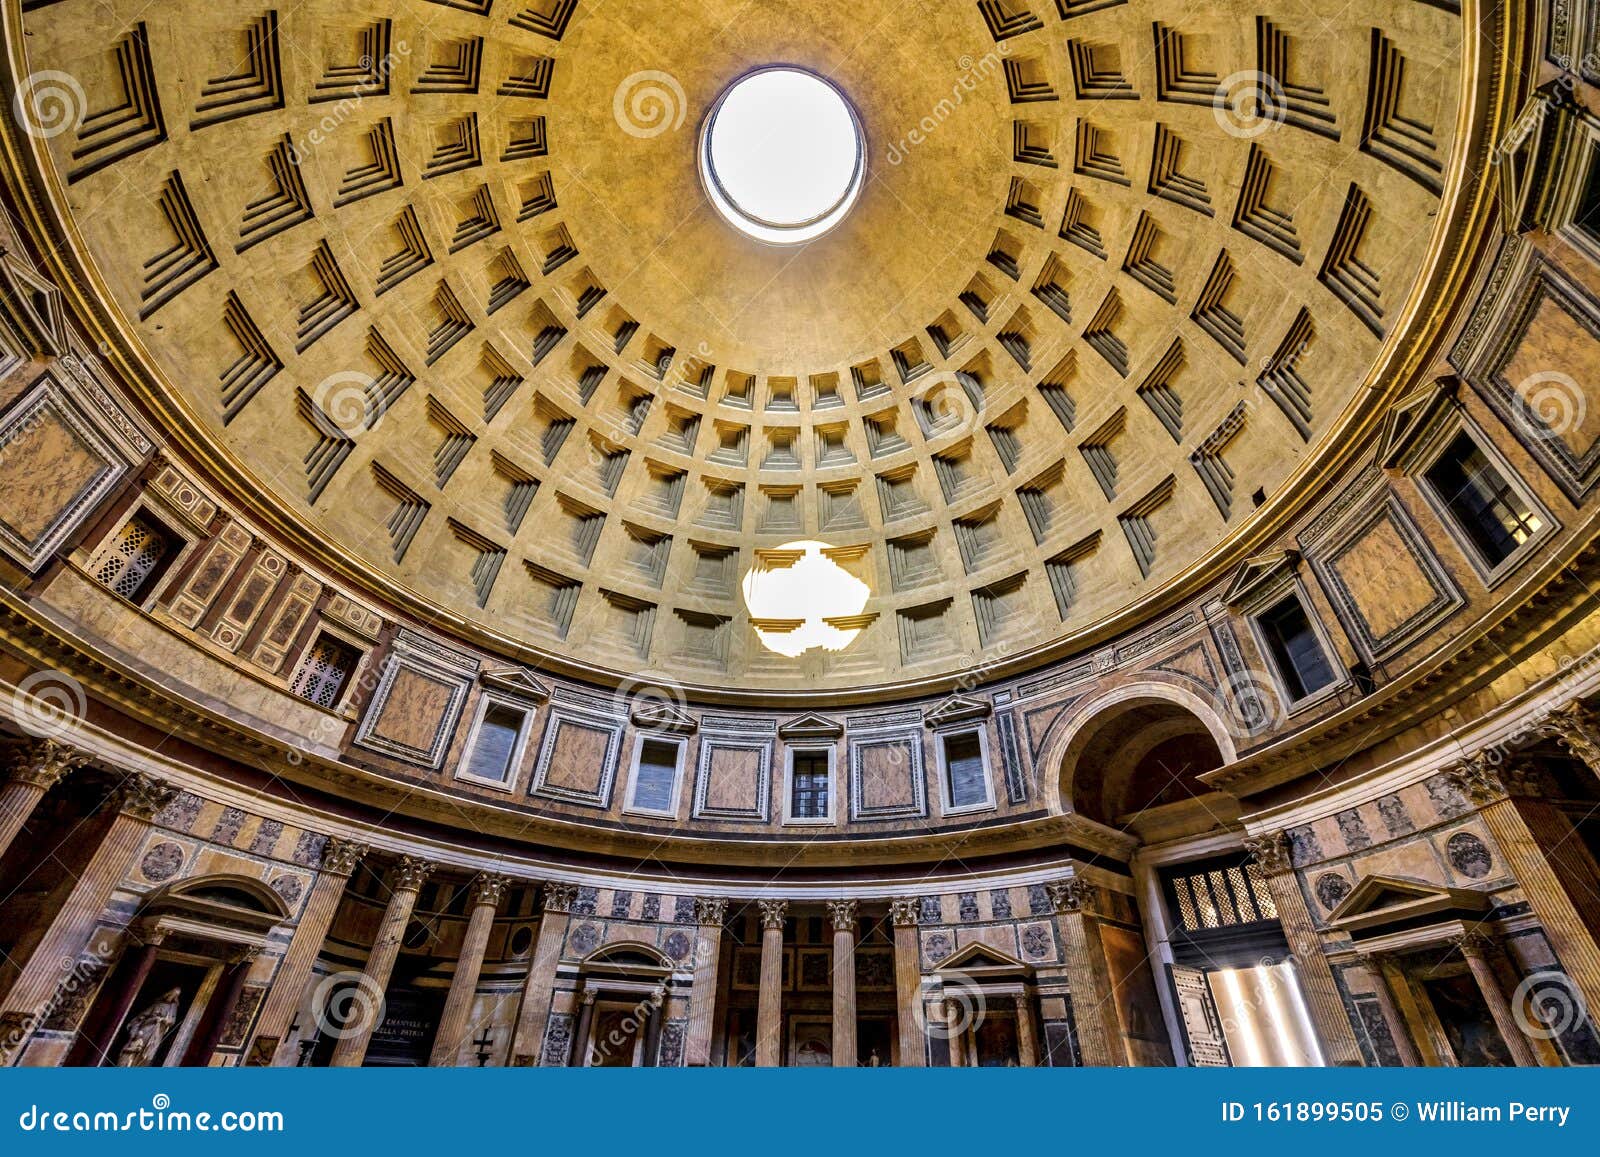 dome oculus pantheon rome italy